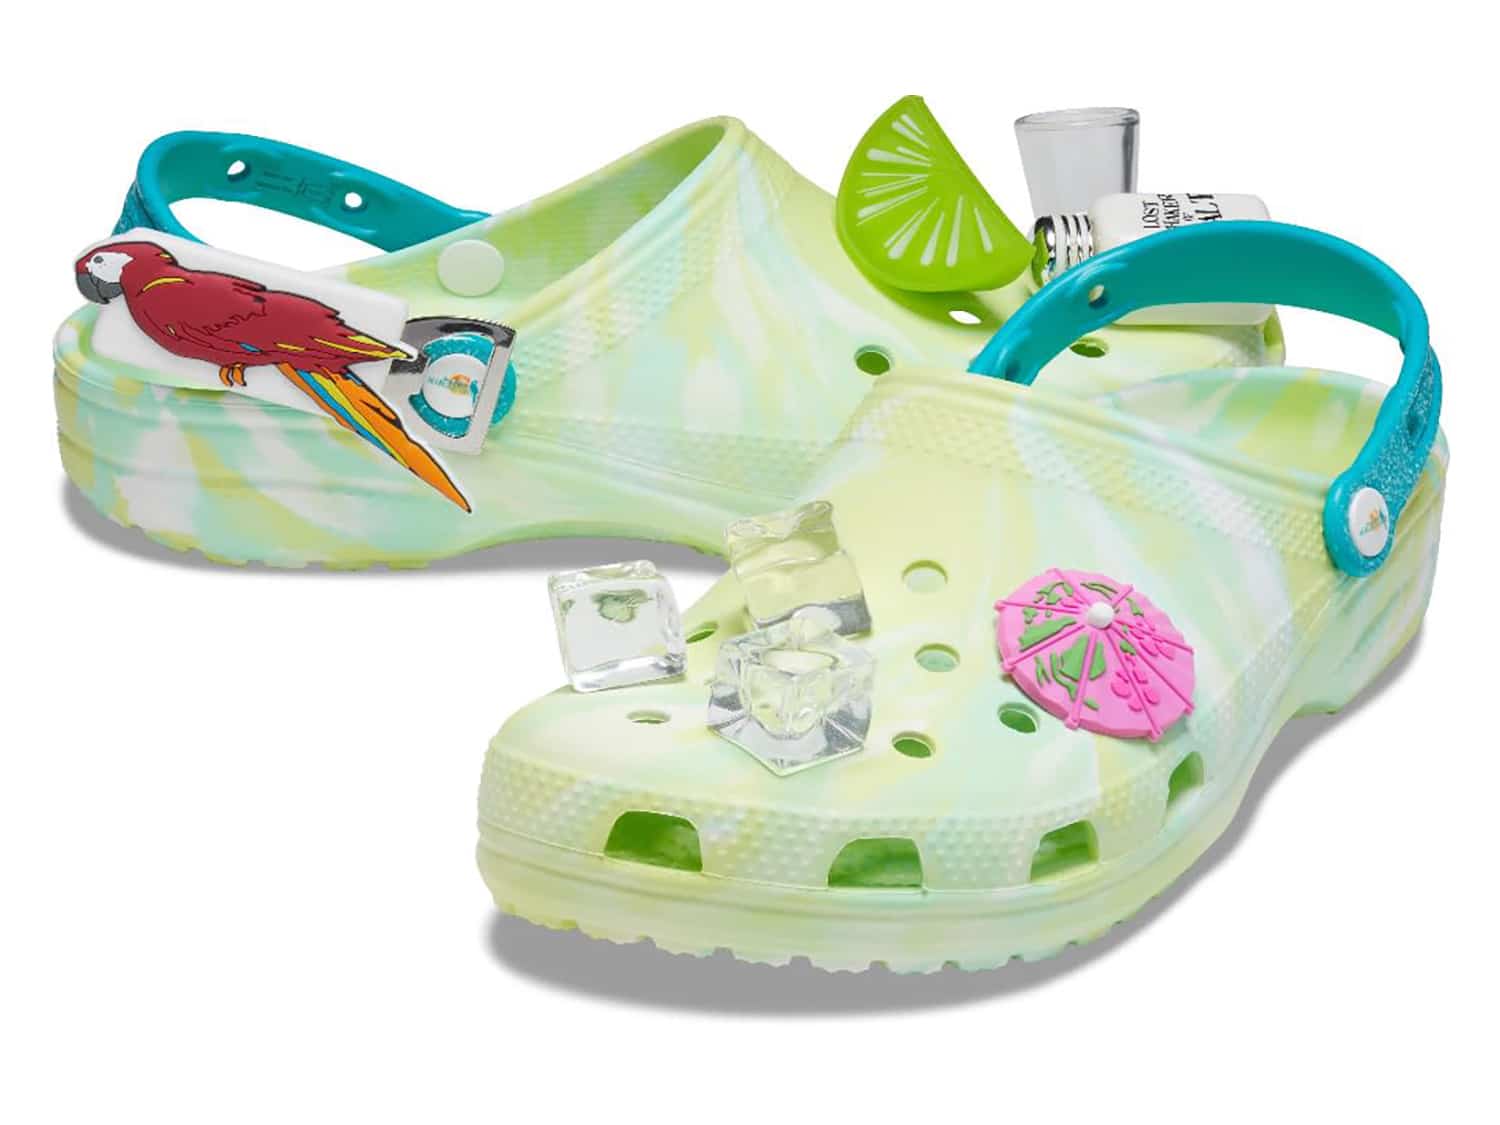 Margaritaville Crocs Have Arrived And They're Pretty Awesome | Islands